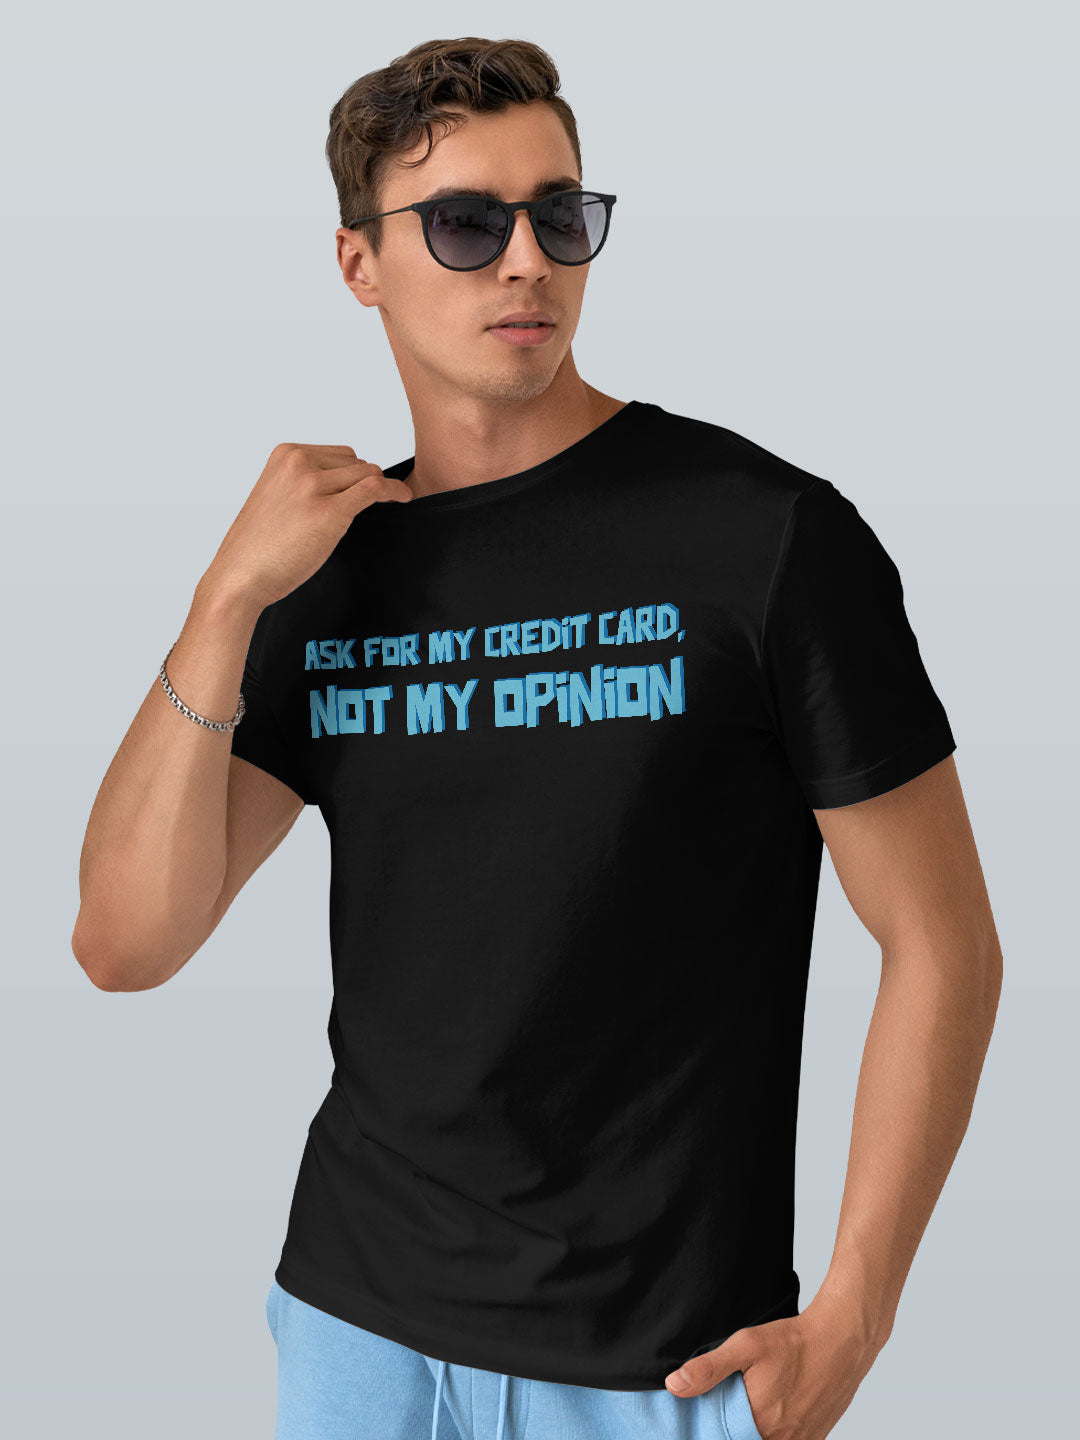 Not My Opinion Tshirt